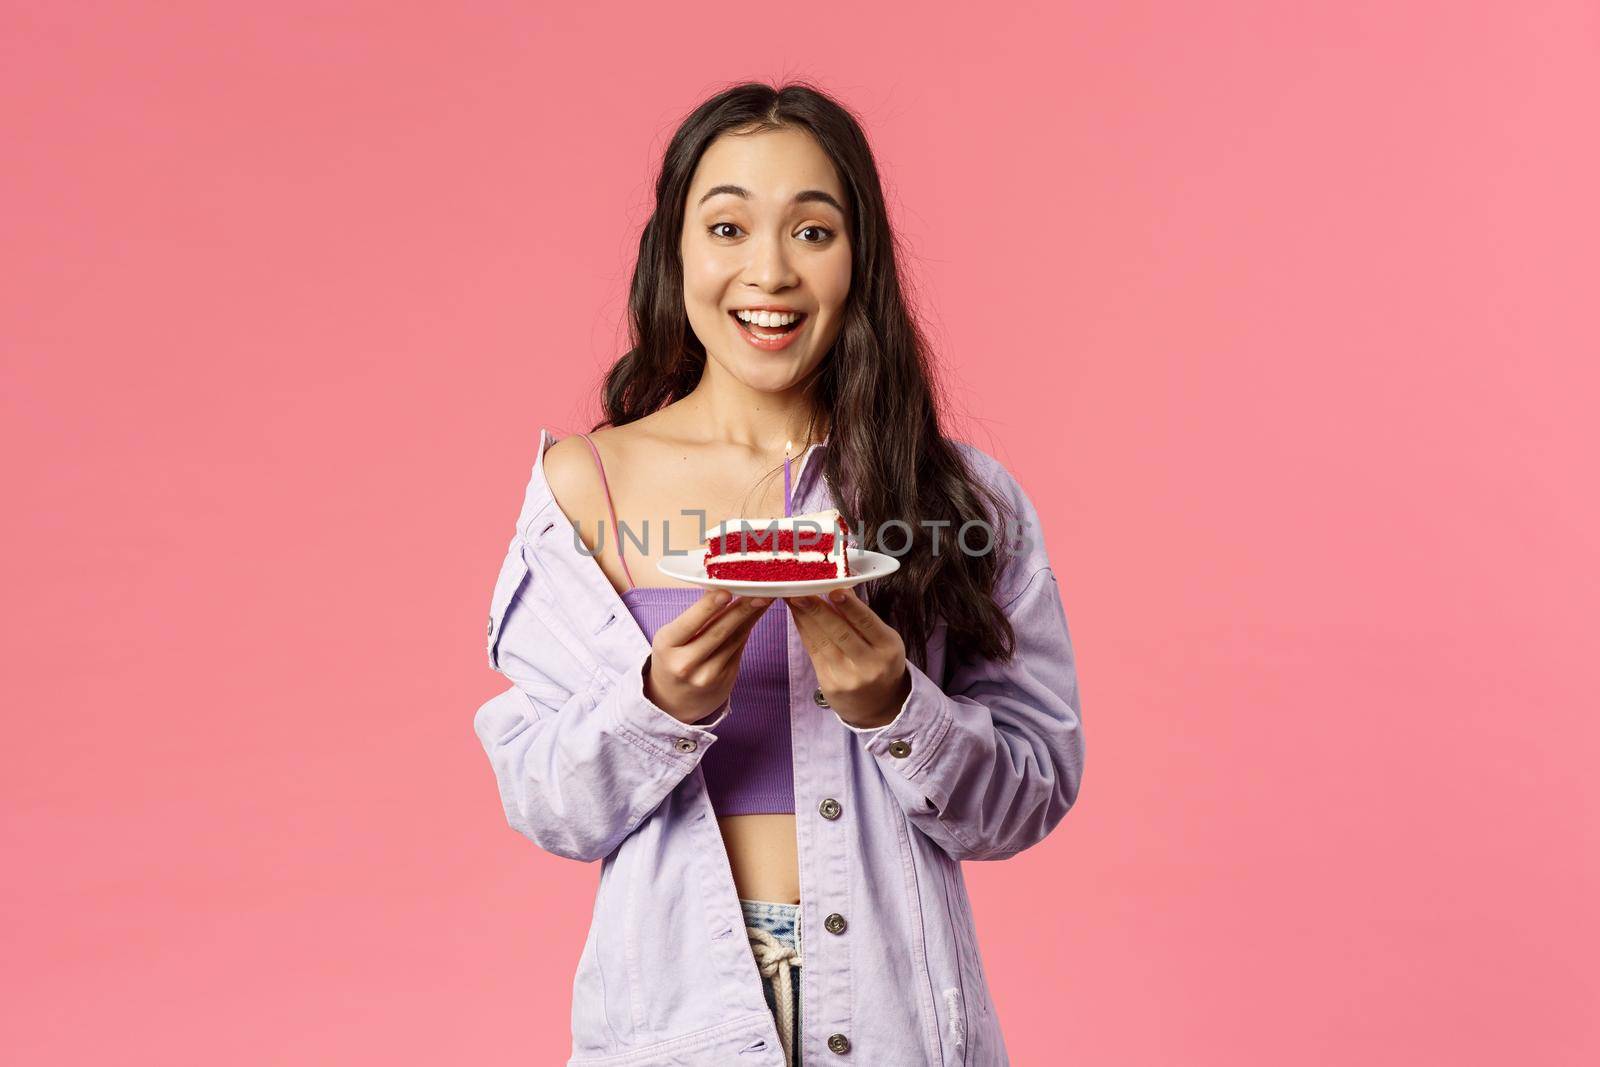 Portrait of cheerful, happy young cute woman baked a dessert special for you, holding piece of cake on plate, suggesting try it, smiling amused and excited, eating favorite food, pink background by Benzoix